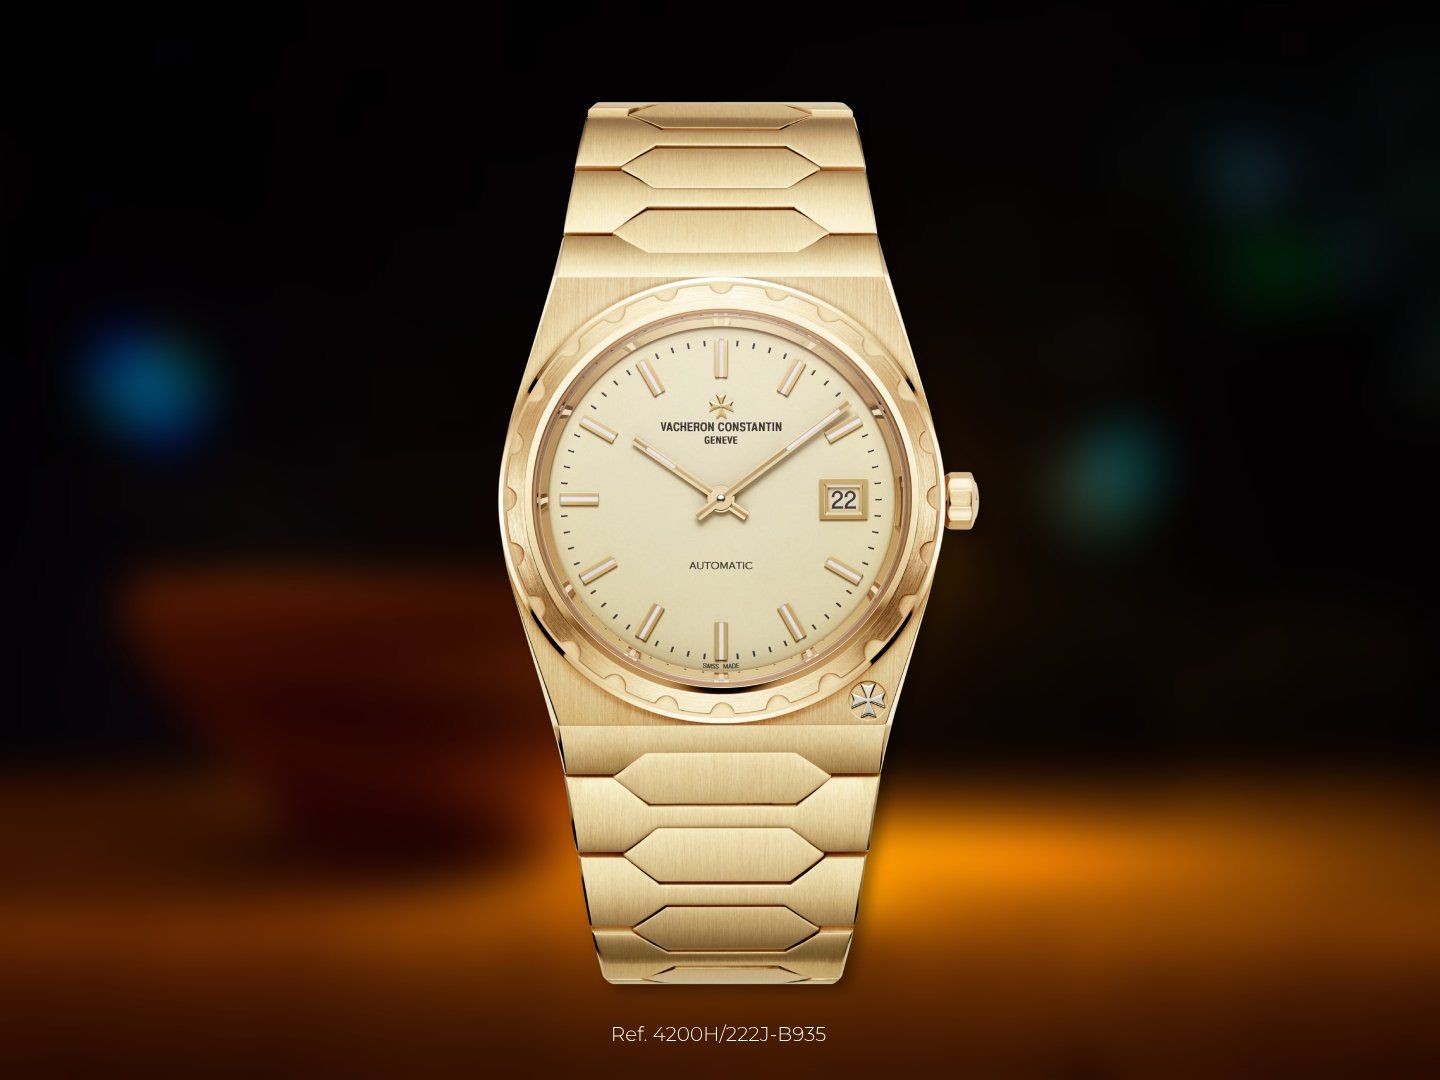 Top 5 Gold Watches To Glam Up The Festive Season